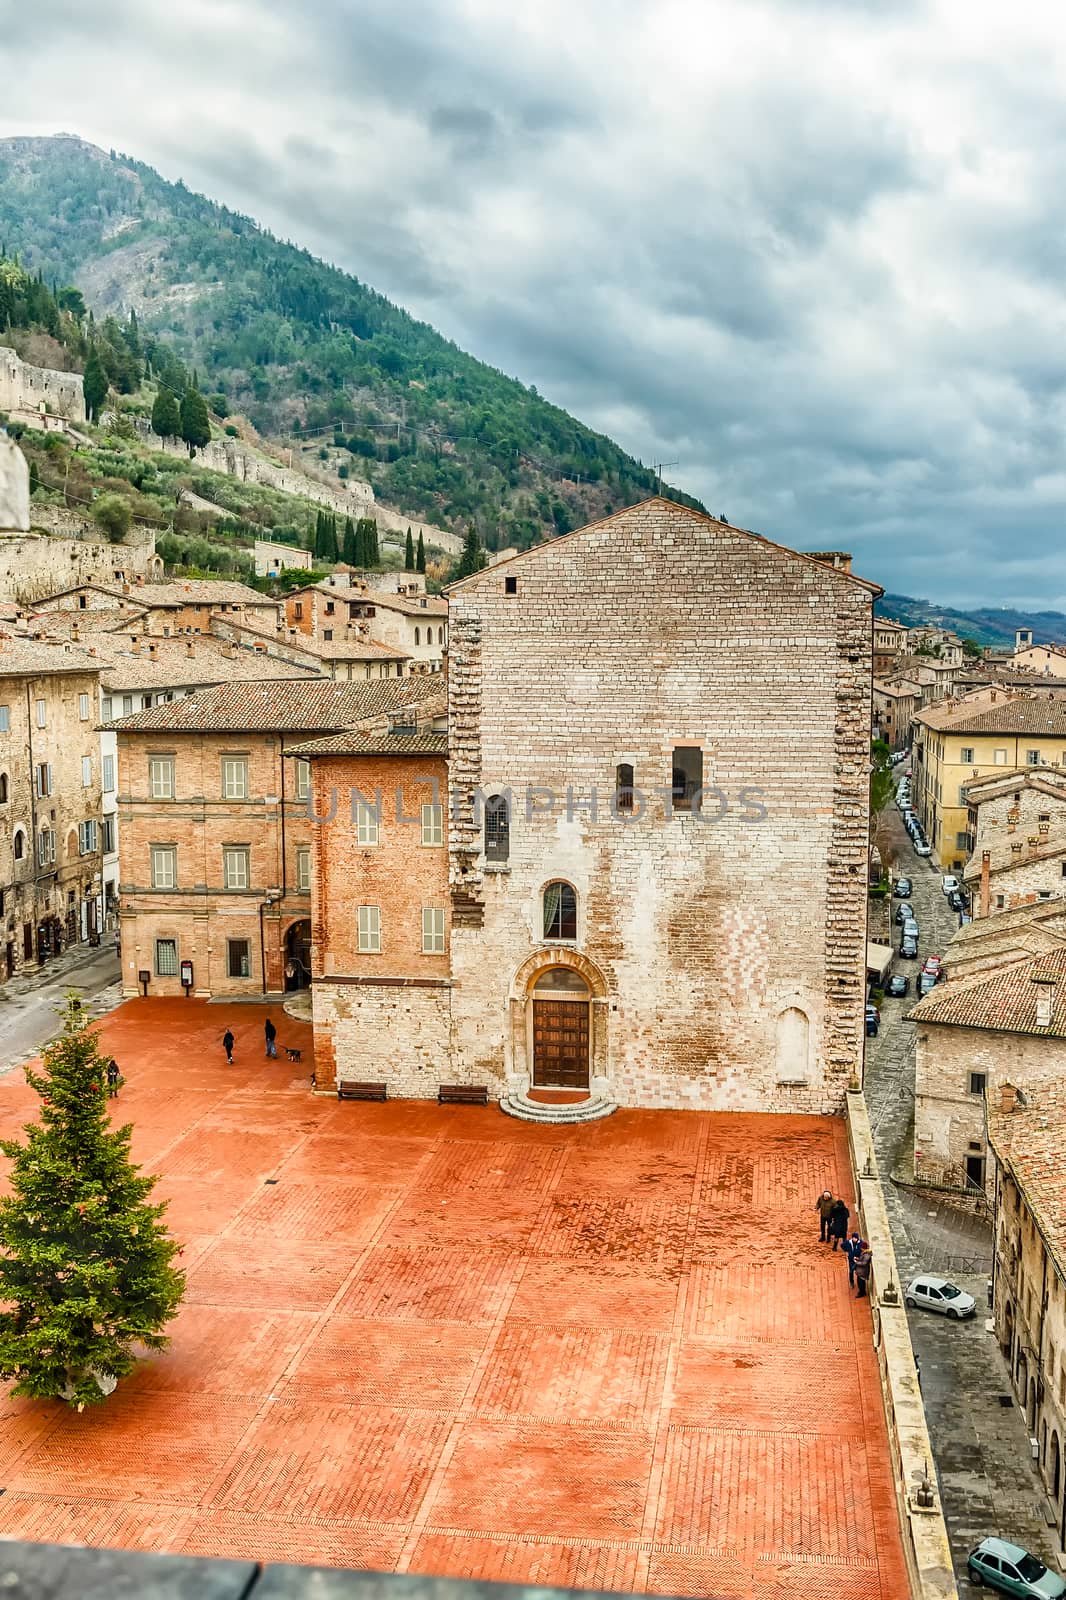 Aerial view of Piazza Grande, scenic main square in Gubbio, one of the most beautiful medieval towns in central Italy